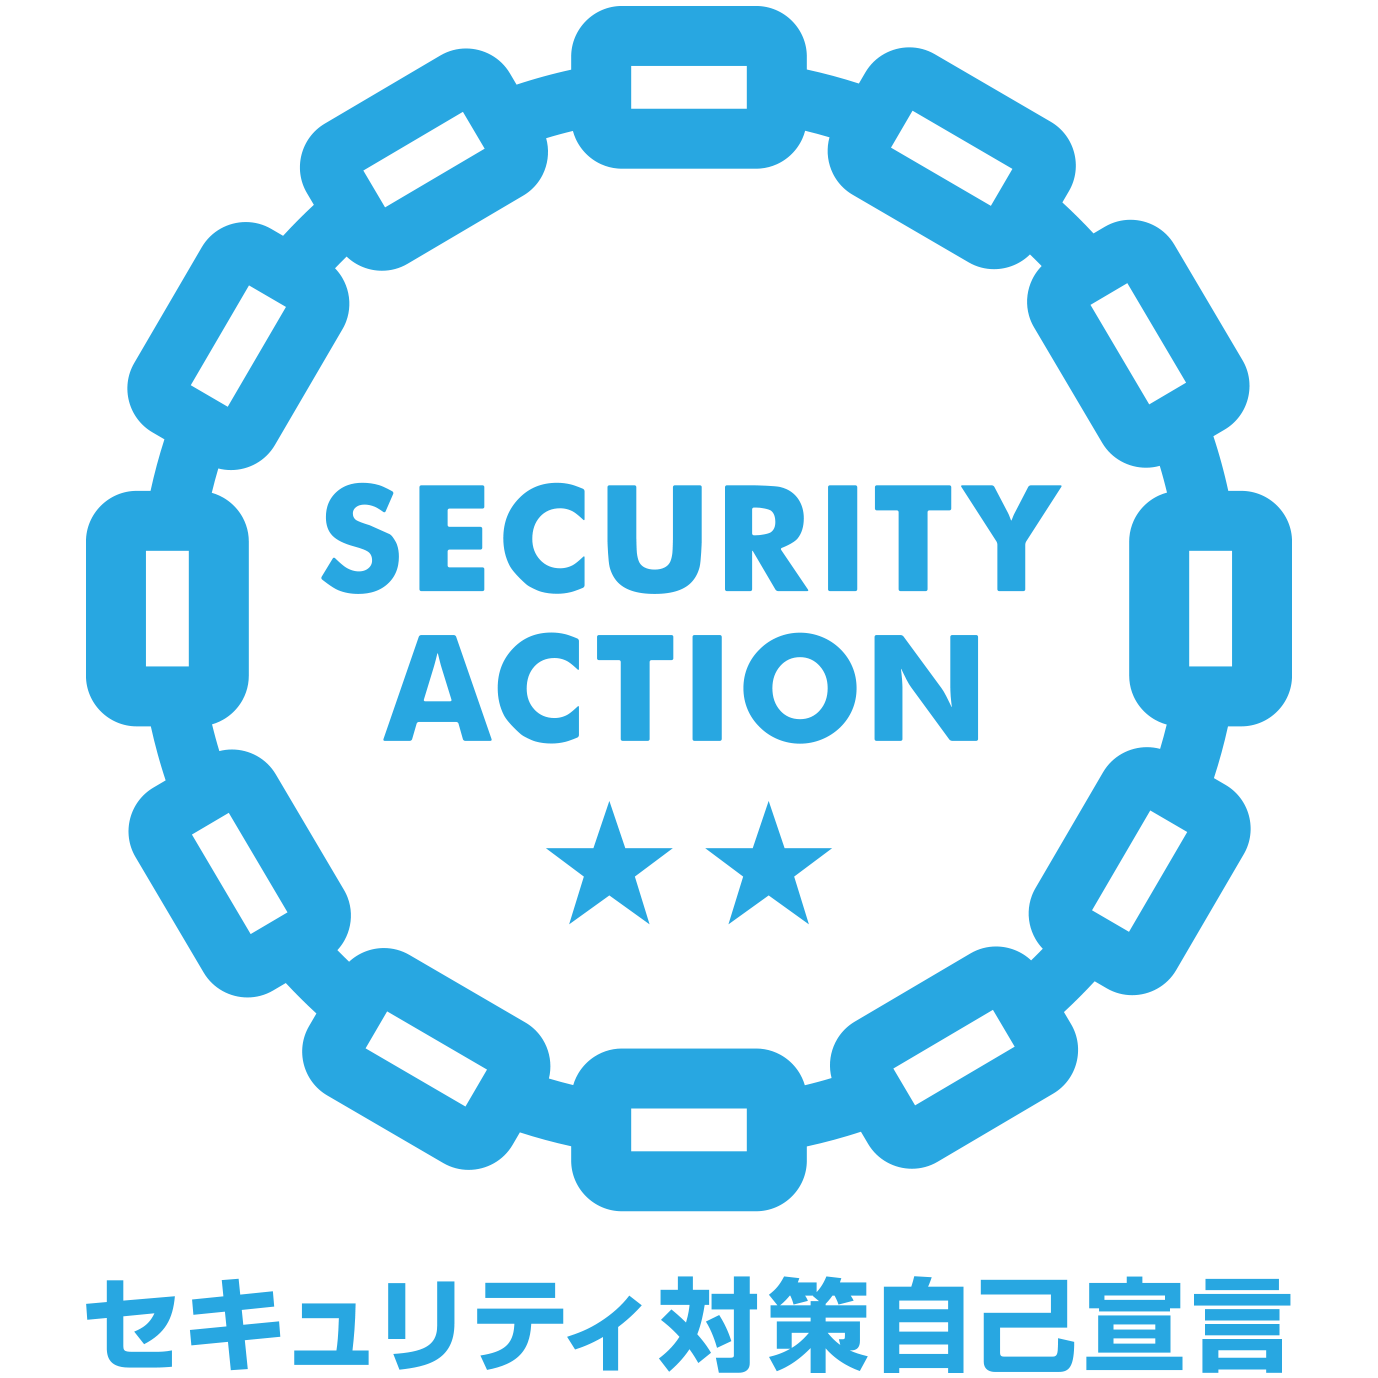 IPA security action